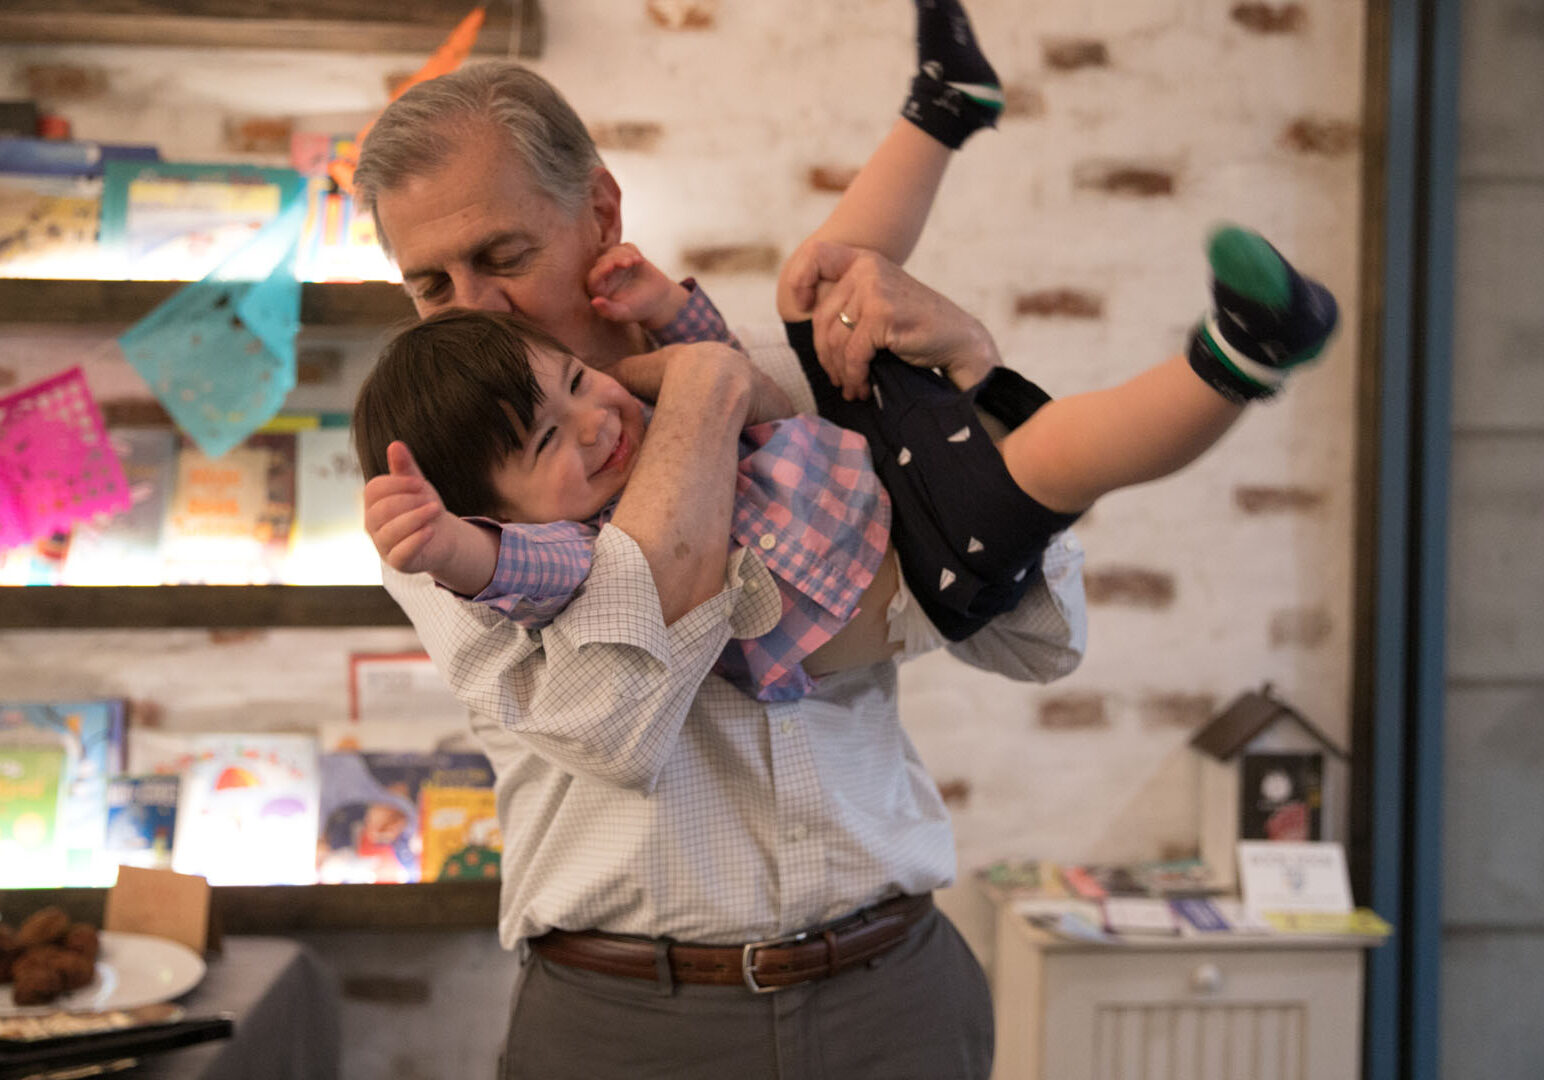 Father "flying" his son like an airplane holding him around the chest